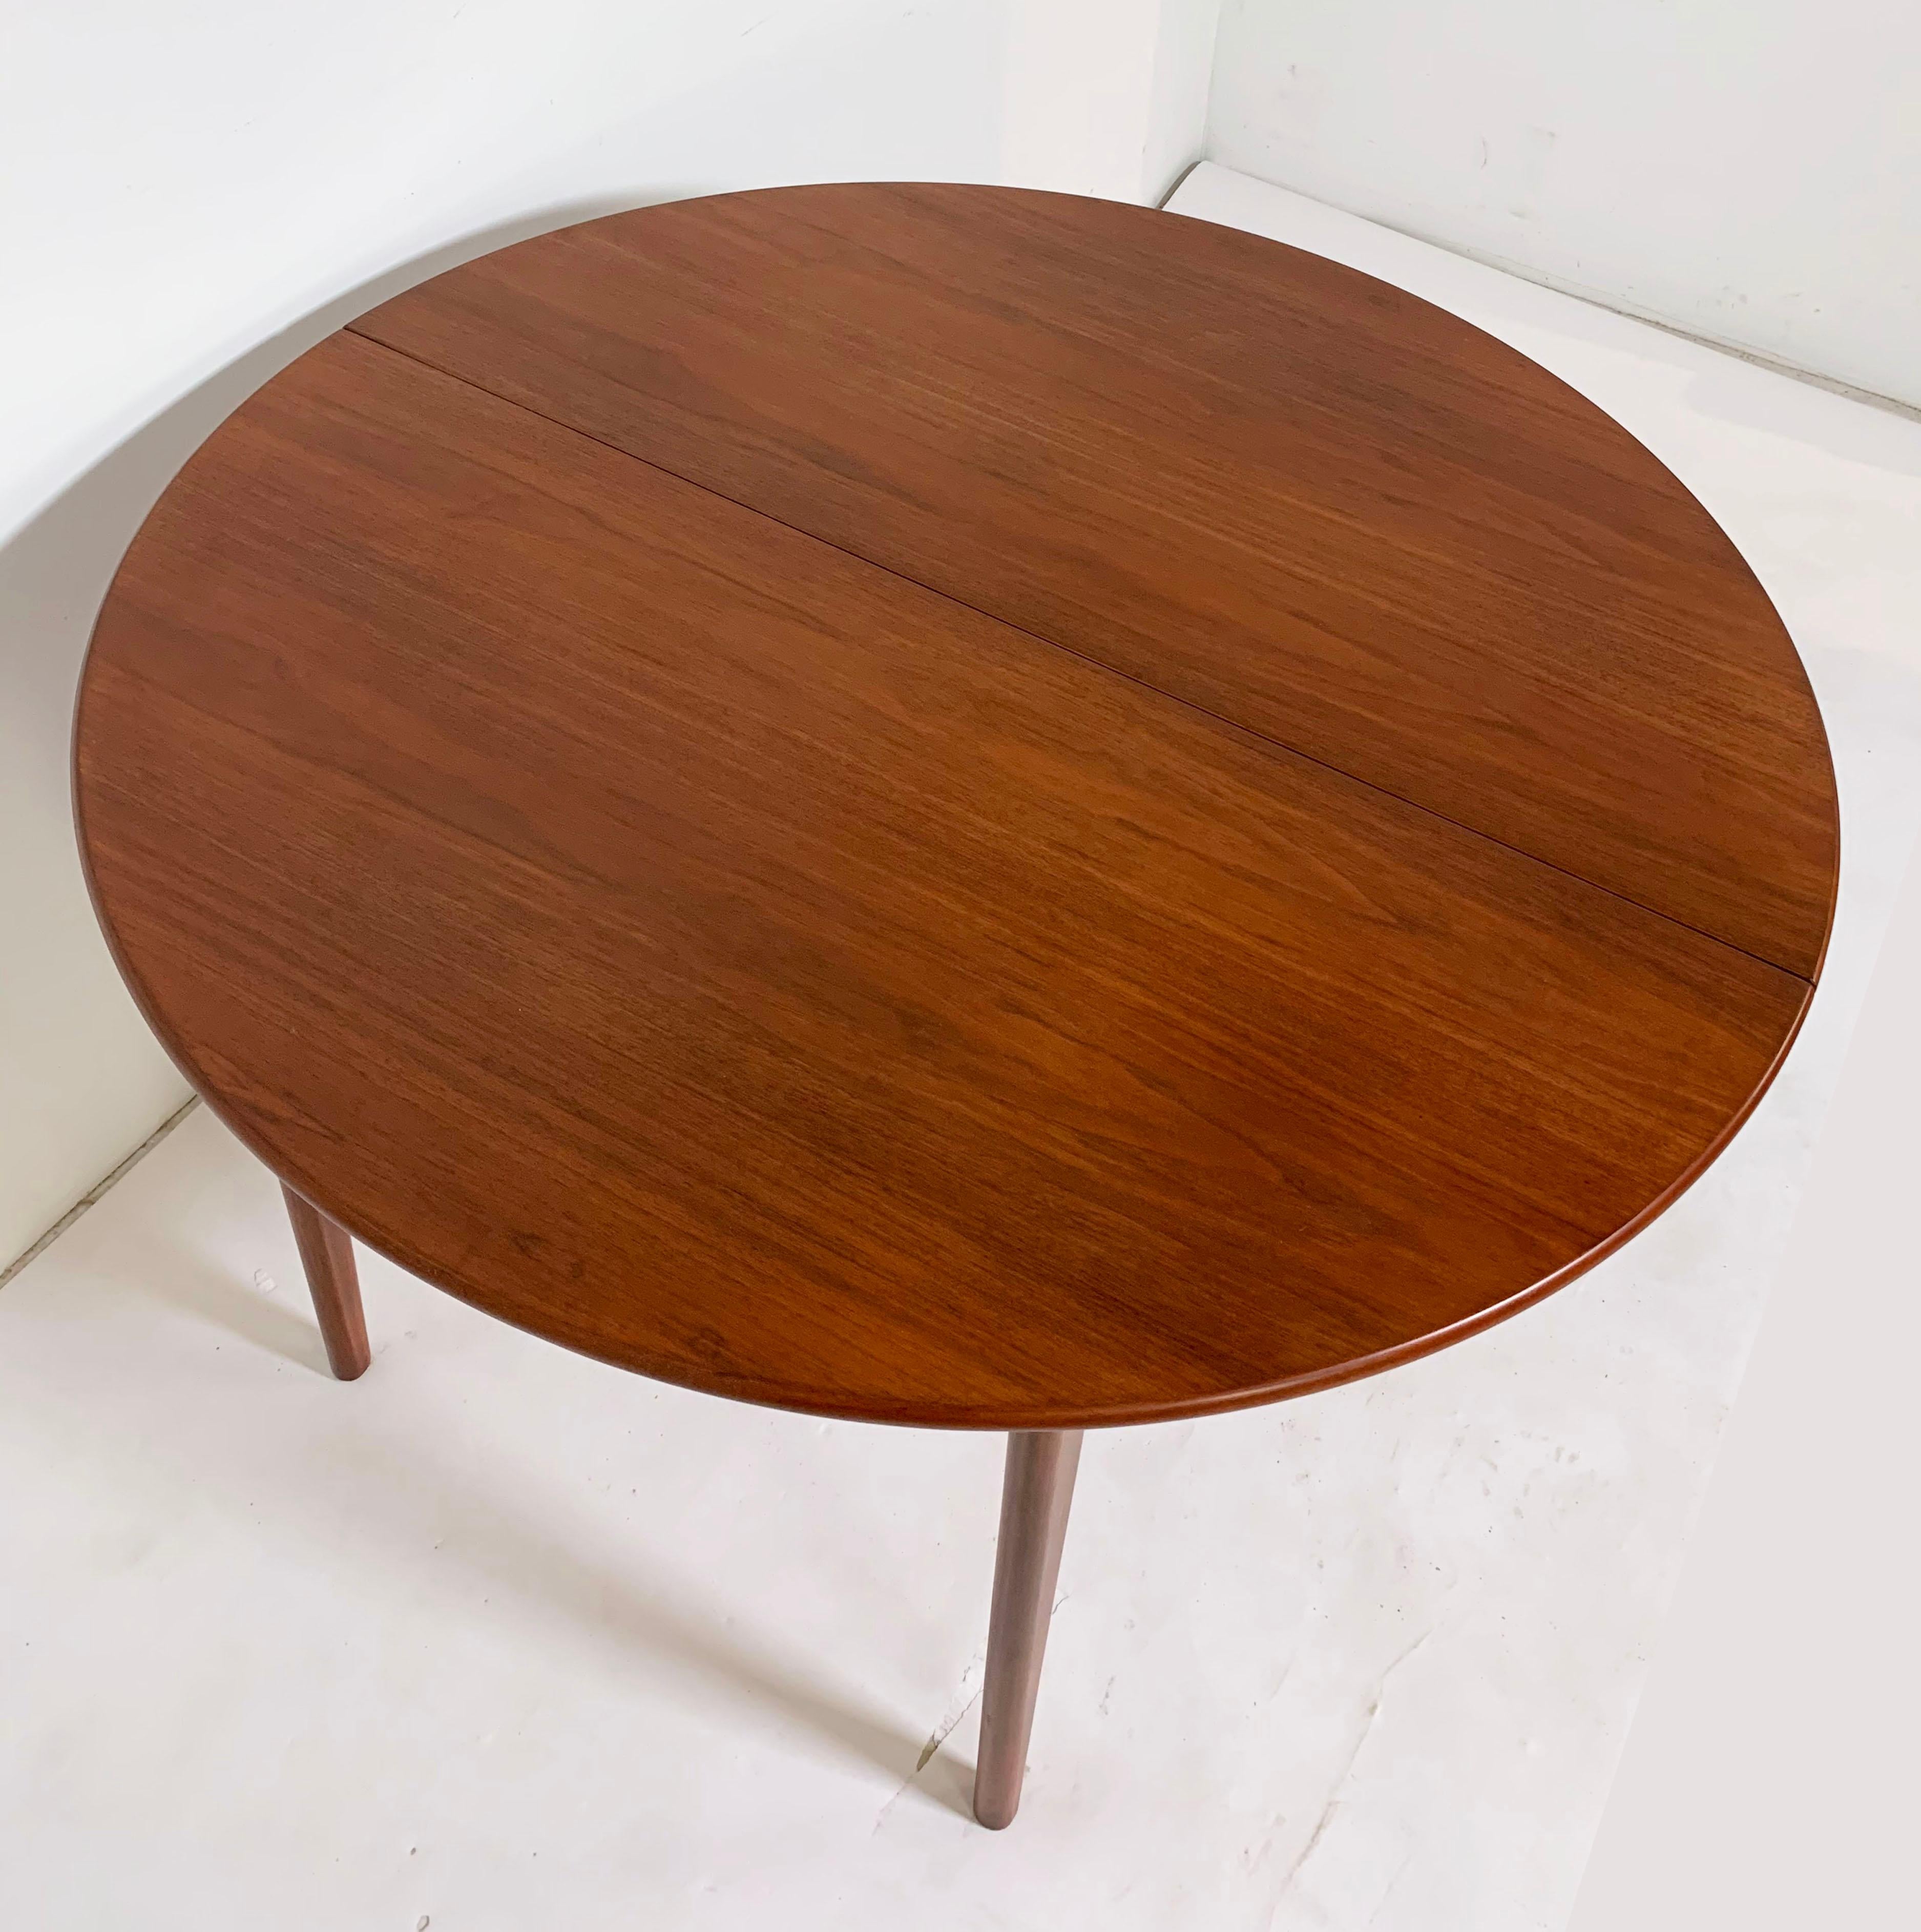 Scandinavian Modern Round Danish Teak Dining Table with Two Leaves, circa 1960s